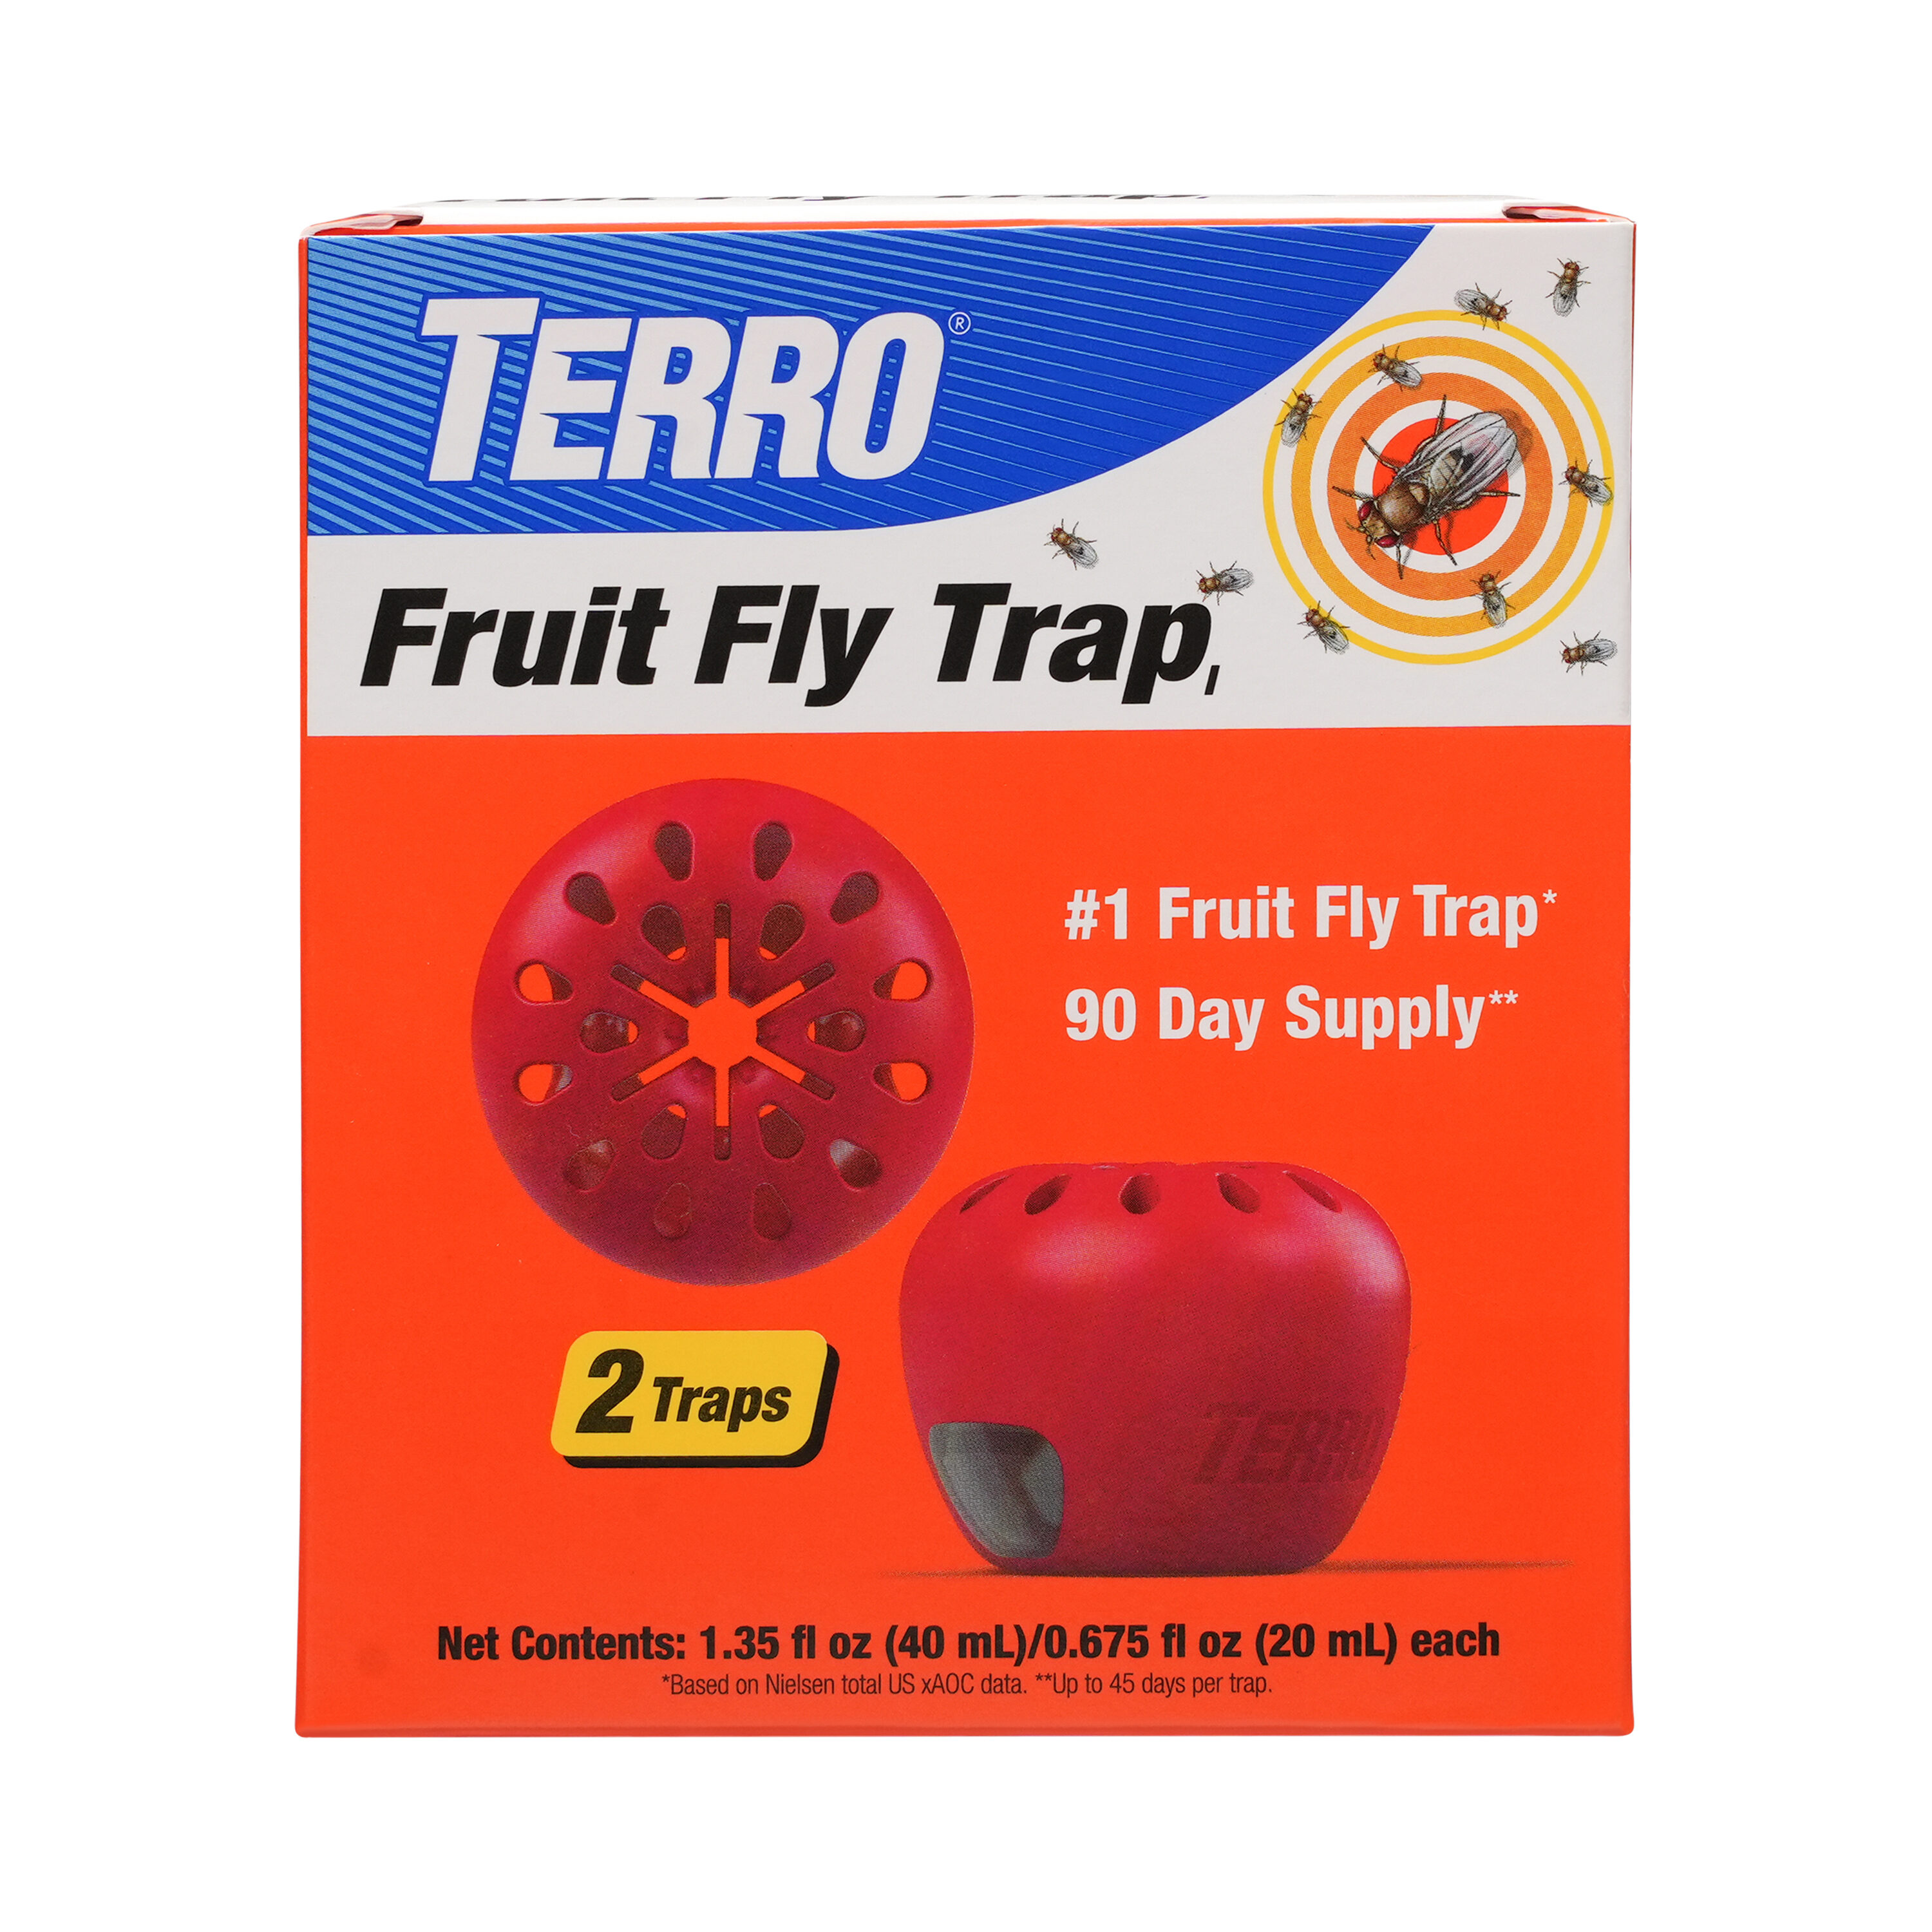 Fruit Fly BarPro  The Number 1 Fruit Fly Killer in America – Fruit Fly  BarPro is the most effective fruit fly control and prevention product on  the market.